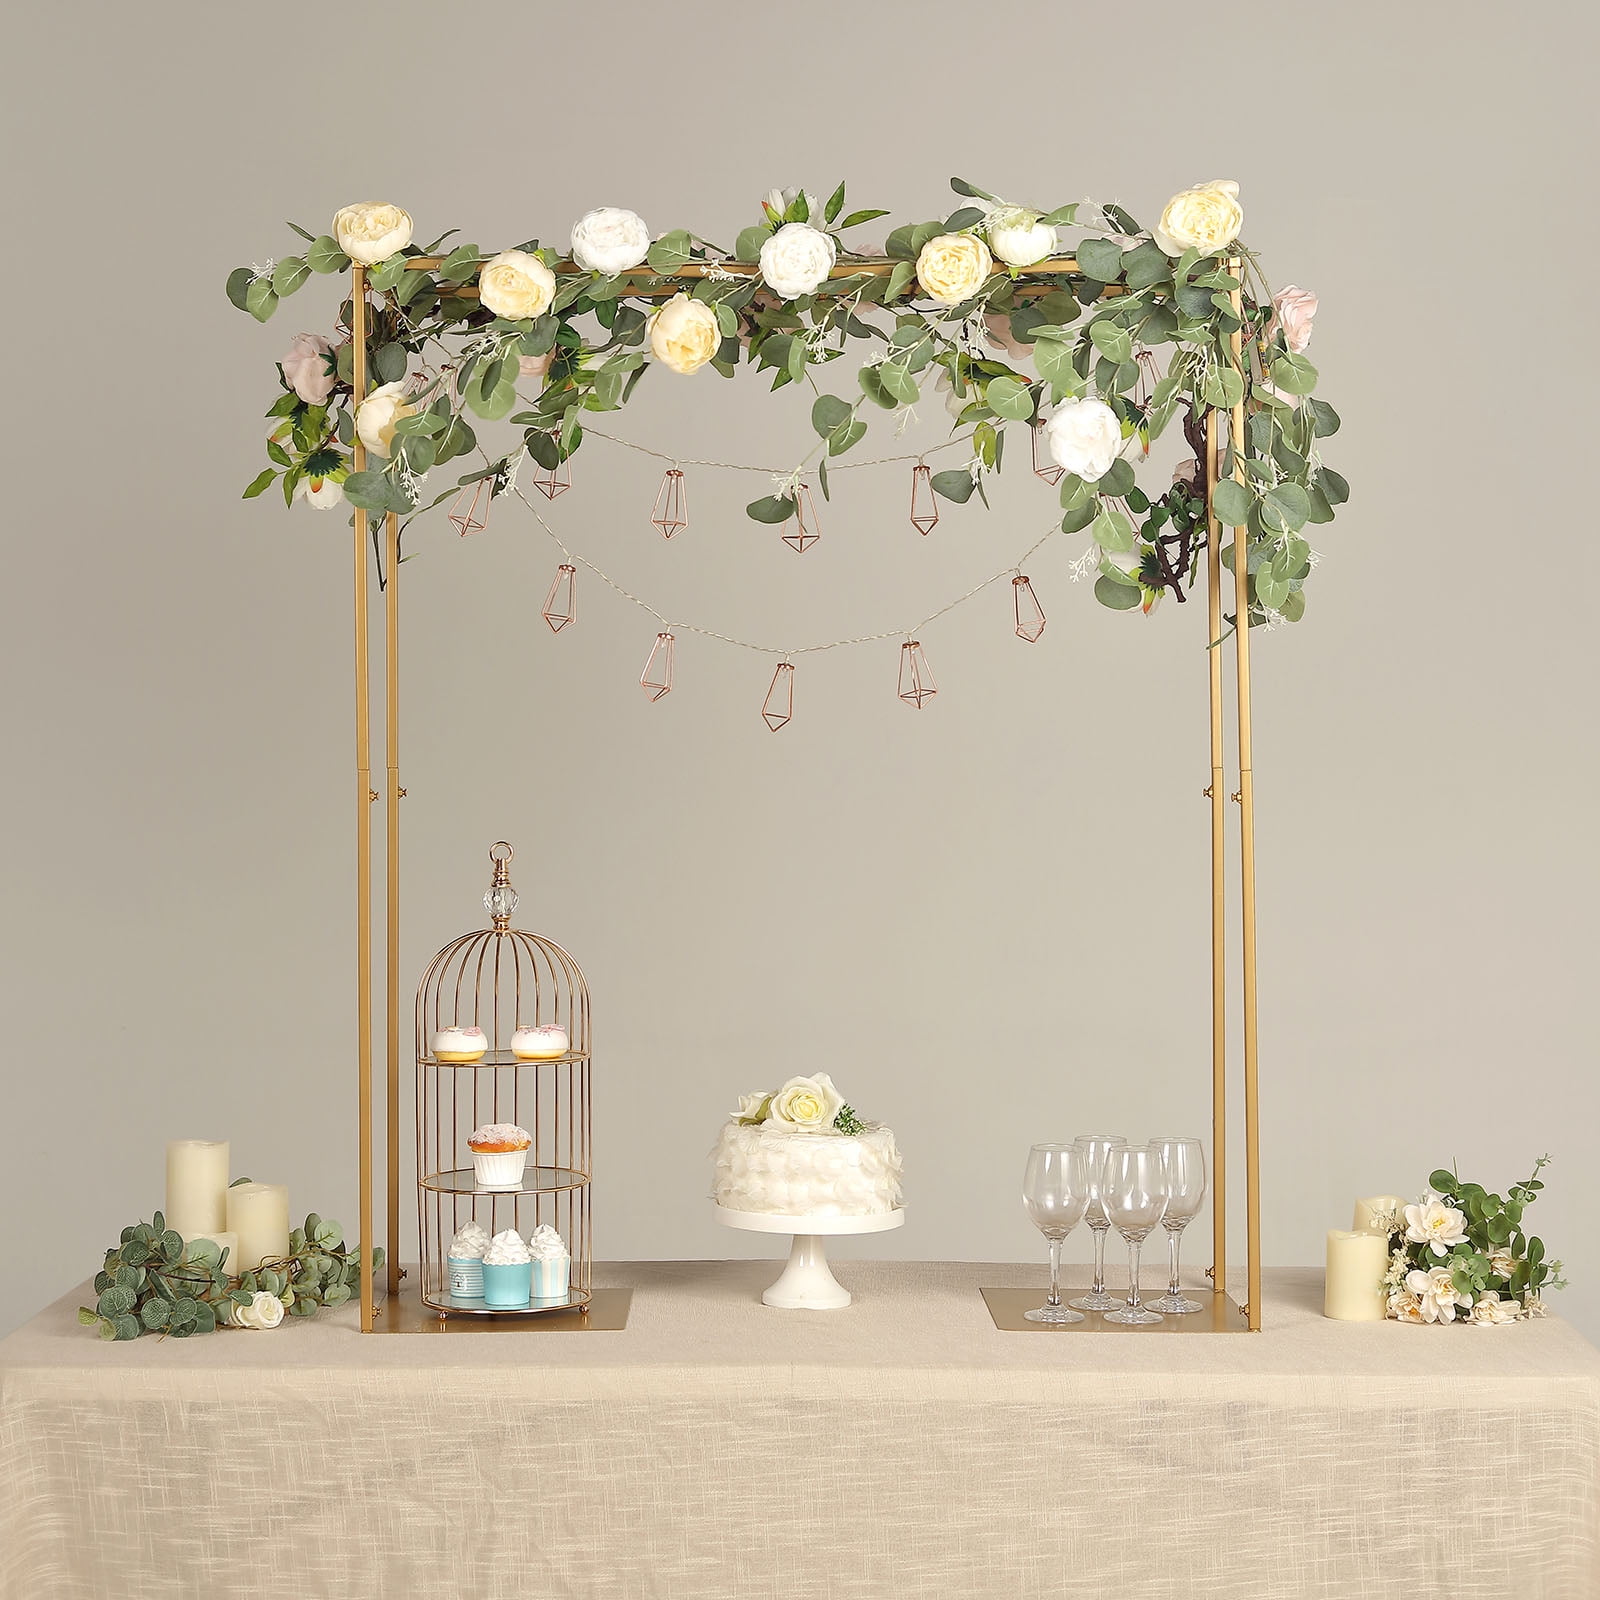 Xiomot Over the Table Rod Stand with Clamps Adjustable 13''-42'' Tall  29-98 Length Gold Table Arch Hanging Stand for Wedding Birthday Party